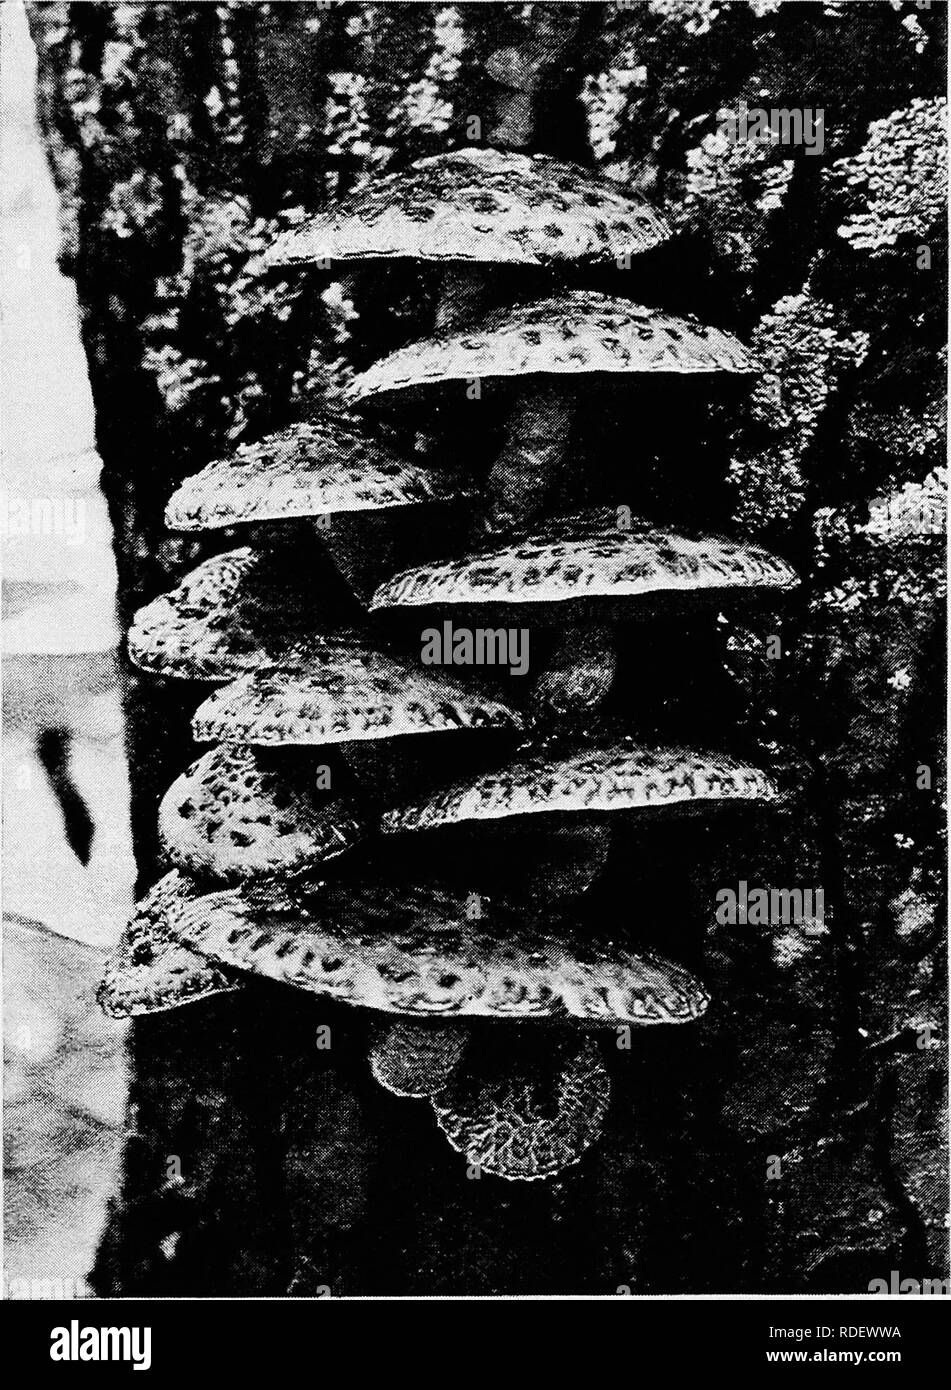 . Minnesota plant diseases. Plant diseases. Minnesota Plant Diseases. 263 with, this parasite is probably not very destructive to timbers in this state. It has been observed on living shade trees.. Fig. 129.—Fruiting bodies of the fatty Pholiota (Fholiota adiposa), in a wound of an oak tree trunk. Original. The scurfy Pholiota rot (Pholiota squarrosa Midi.). This is a close relative of ths fatty Pholiota and forms fruiting bodies which resemble those of the latter. They are not so viscid in rainy weather and are persistently scurfy. It occurs on logs,. Please note that these images are extract Stock Photo